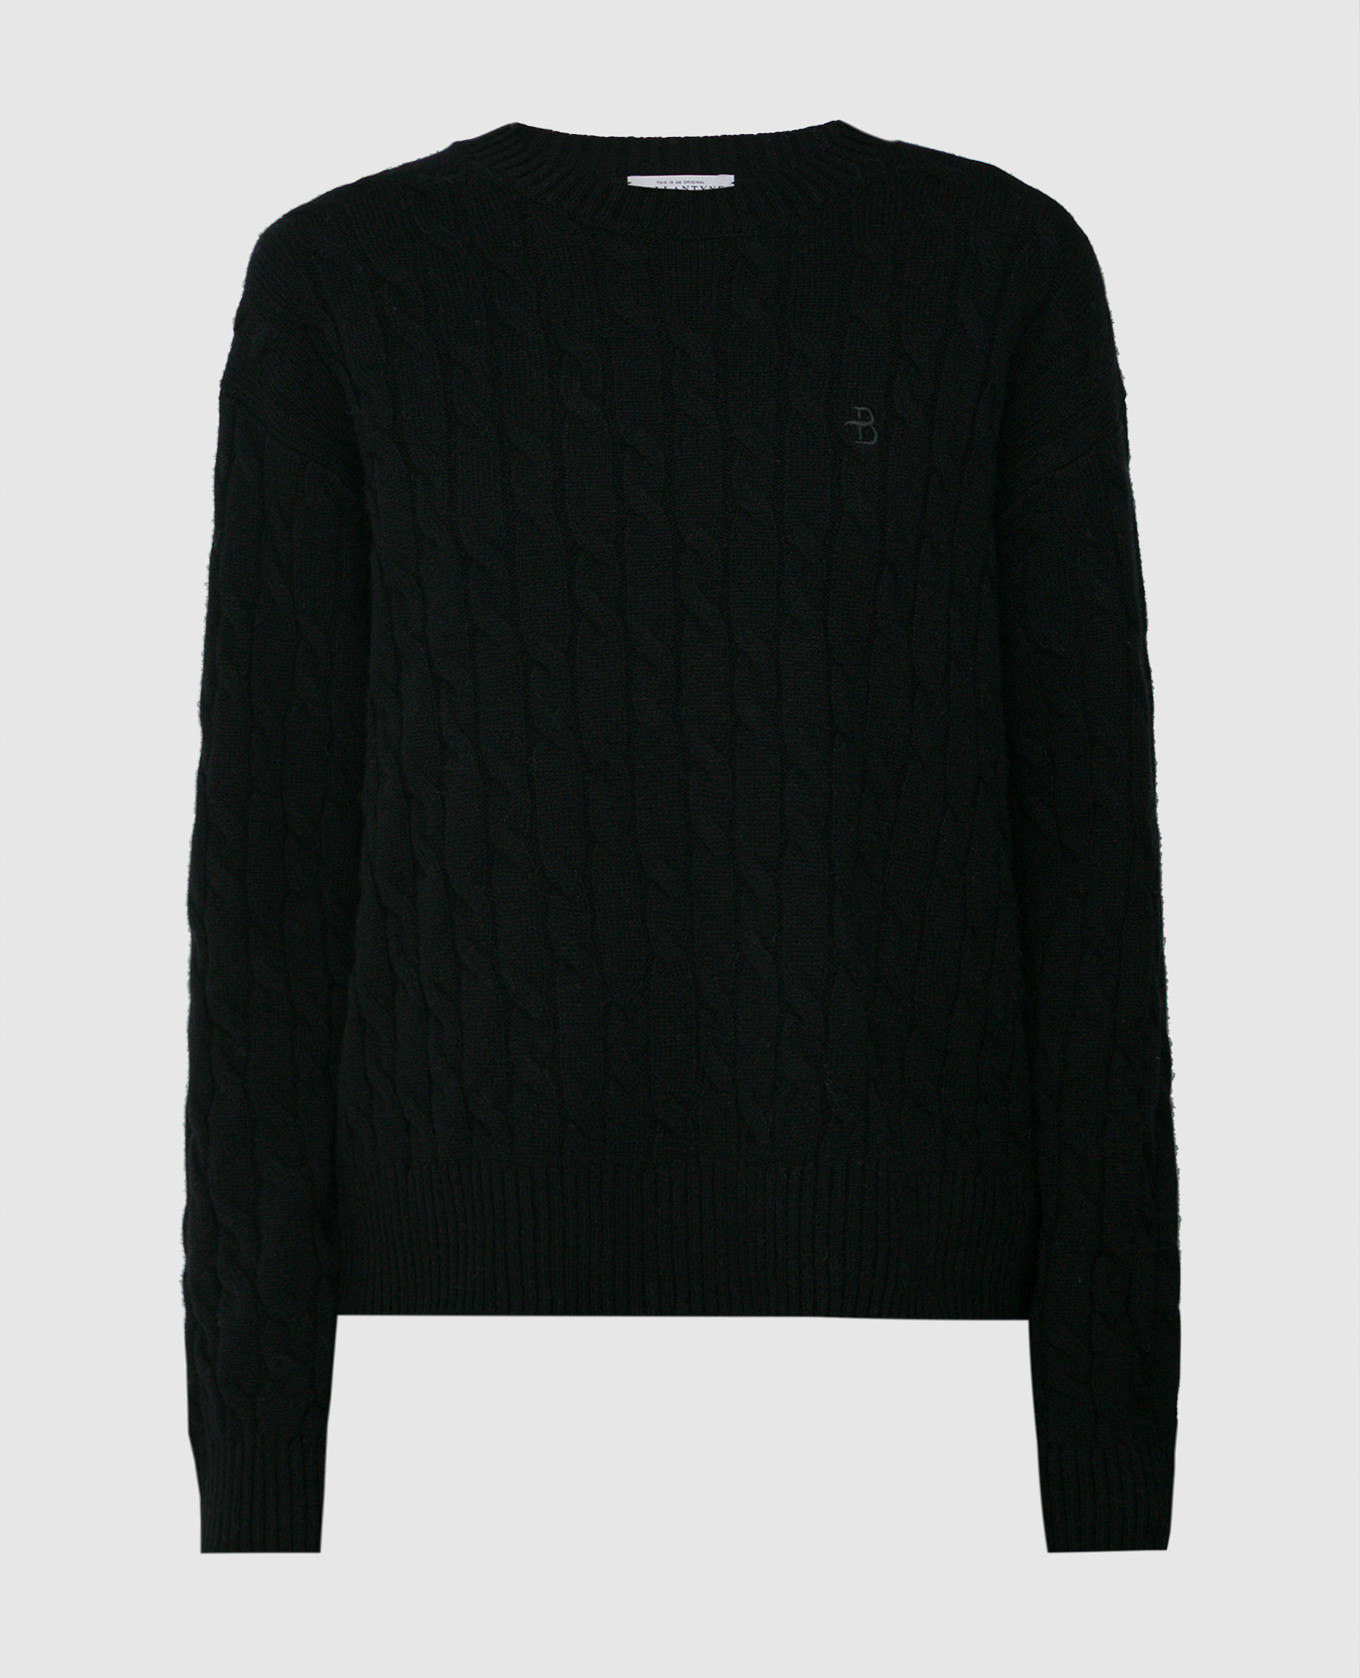 Black sweater made of wool in a textured pattern